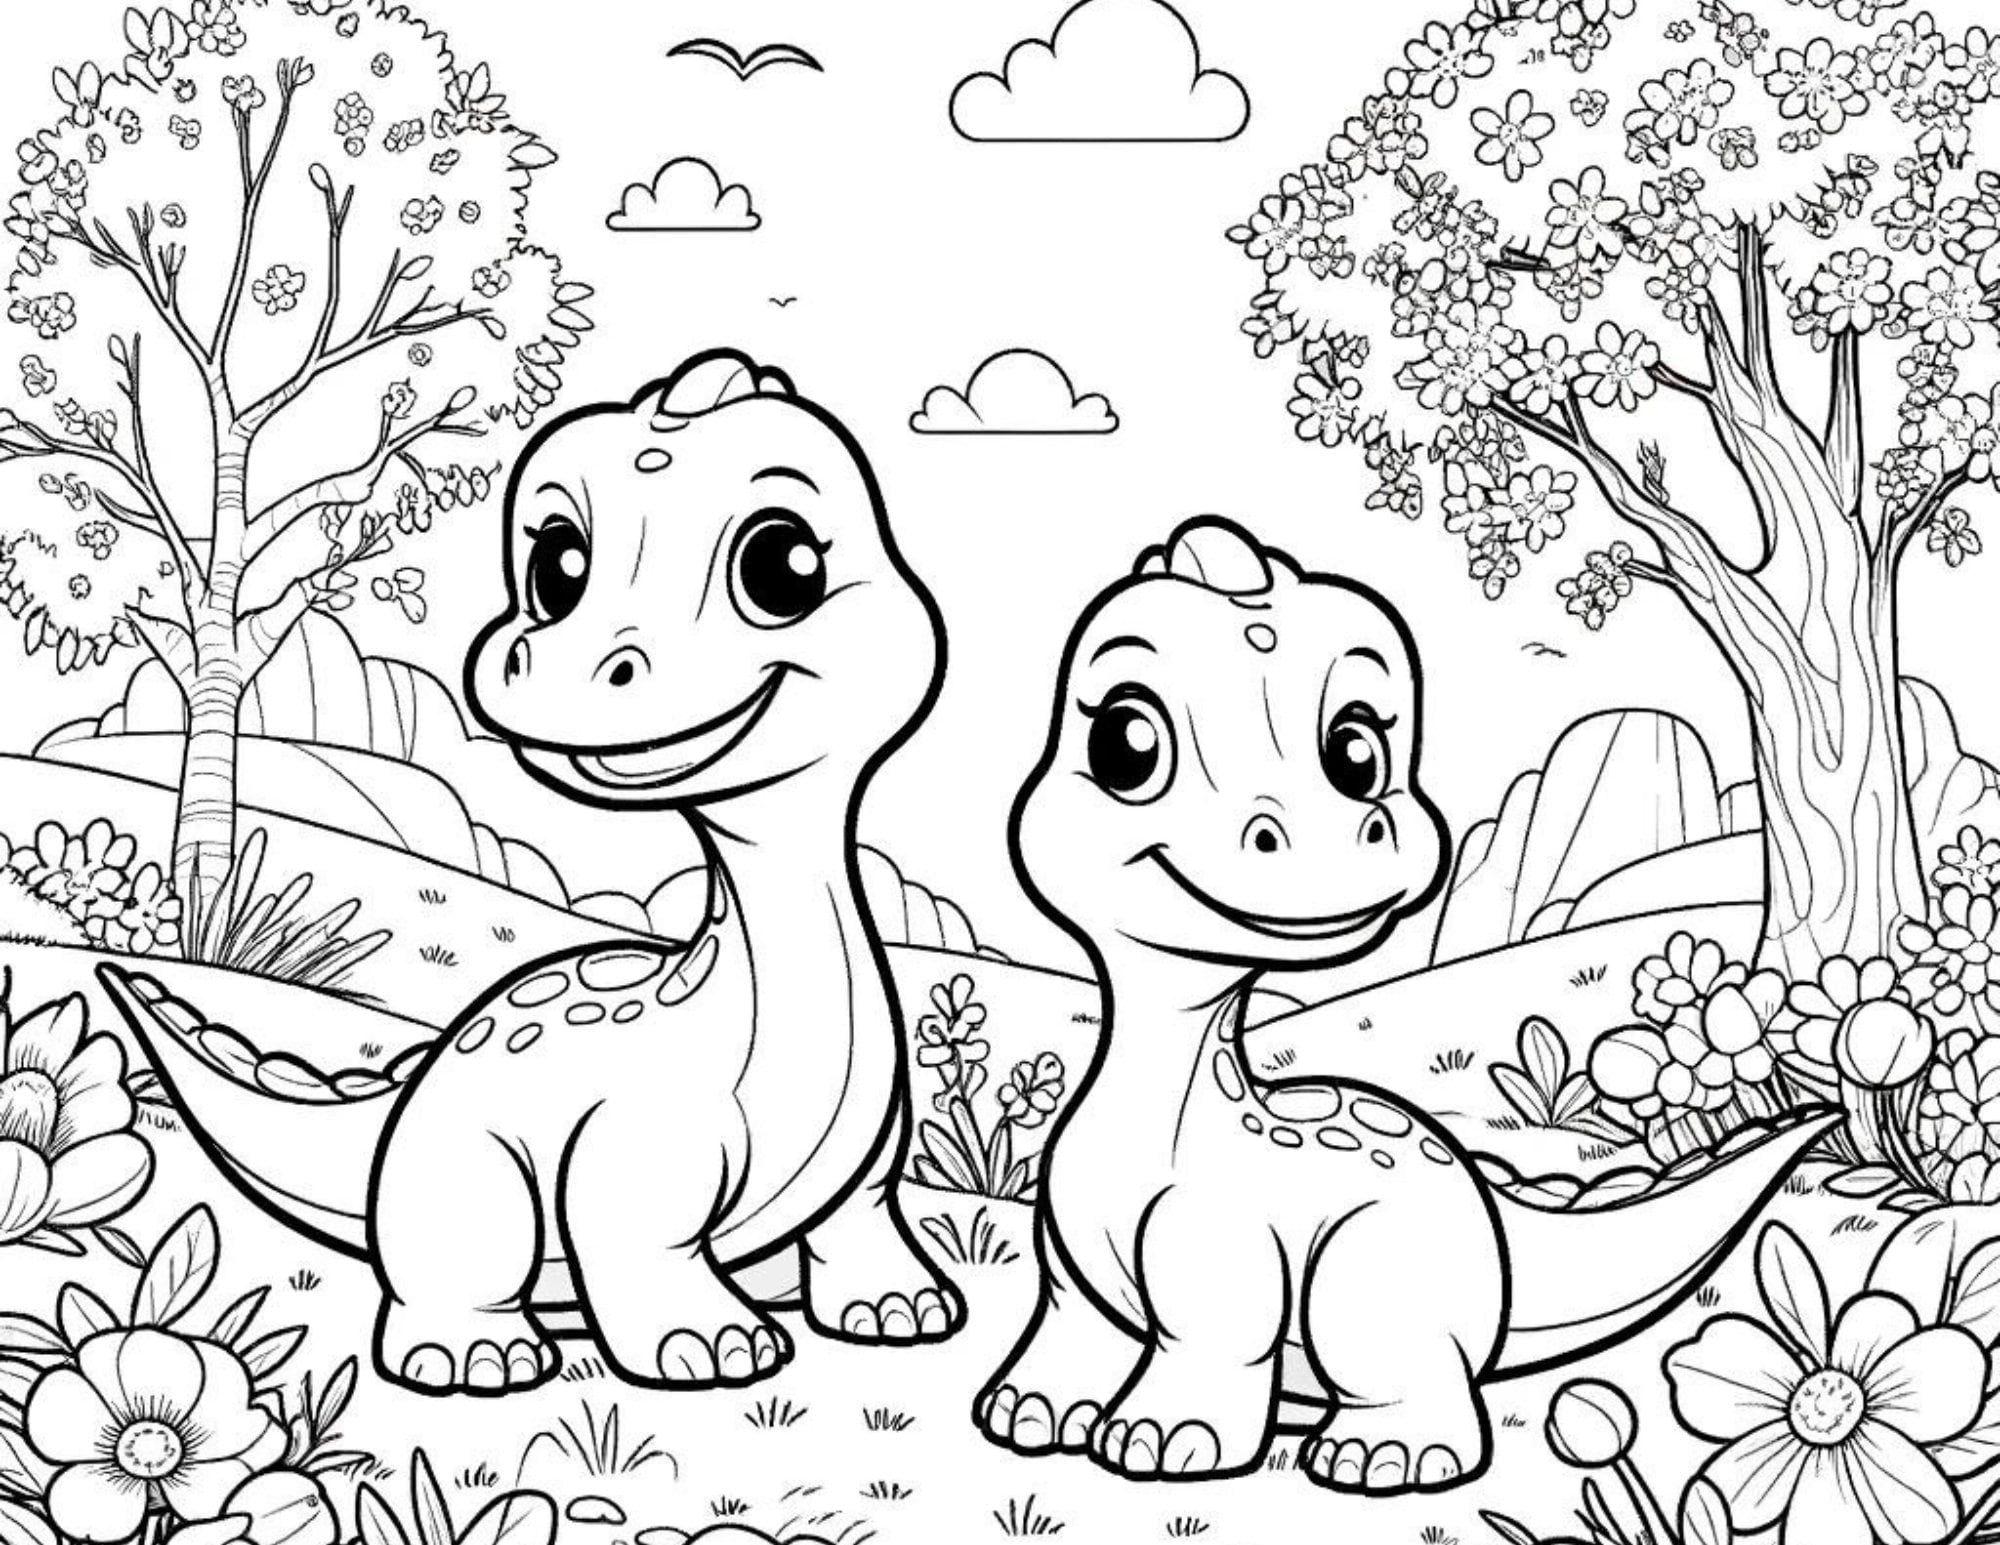 56 Dinosaur Coloring Pages |Book | Kids Ages 4,5,6,7,8,9,10 | Fun Educational Prehistoric Animals | Children Learn Play, Creative Drawing |